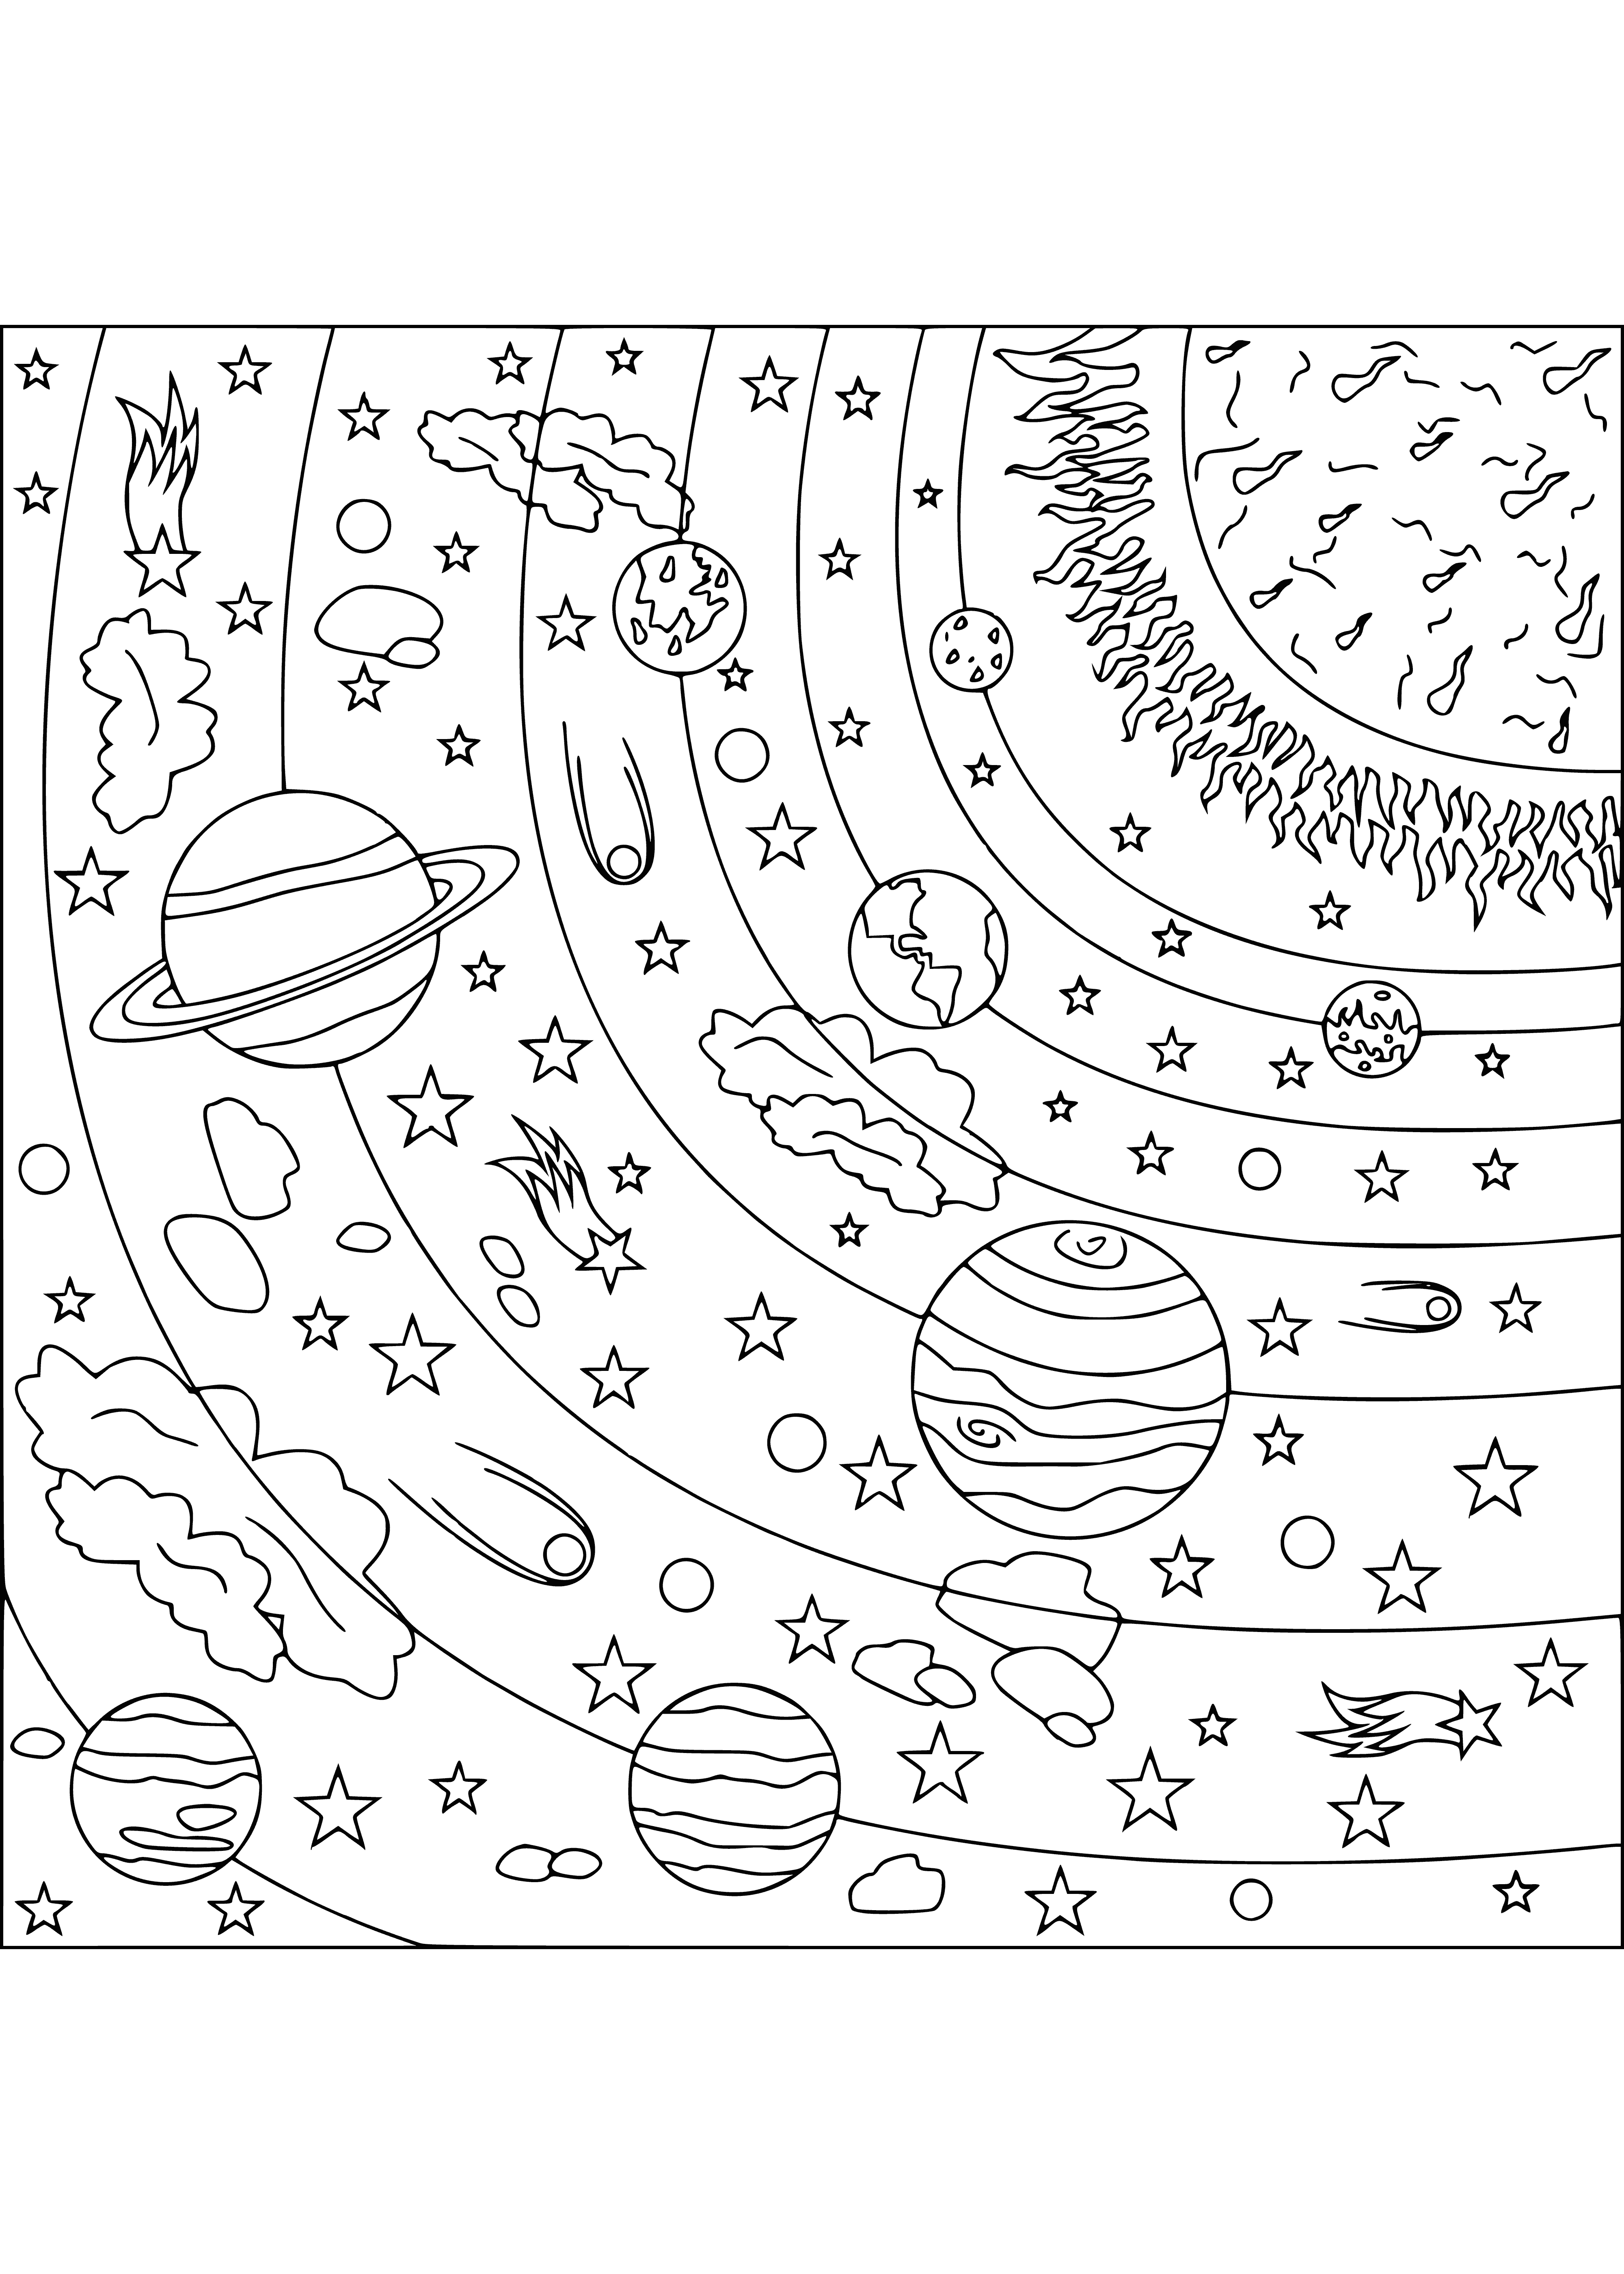 coloring page: Coloring pages of solar system, plaents, asteroids, stars & swirls - perfect for anti-stress & calming effects.